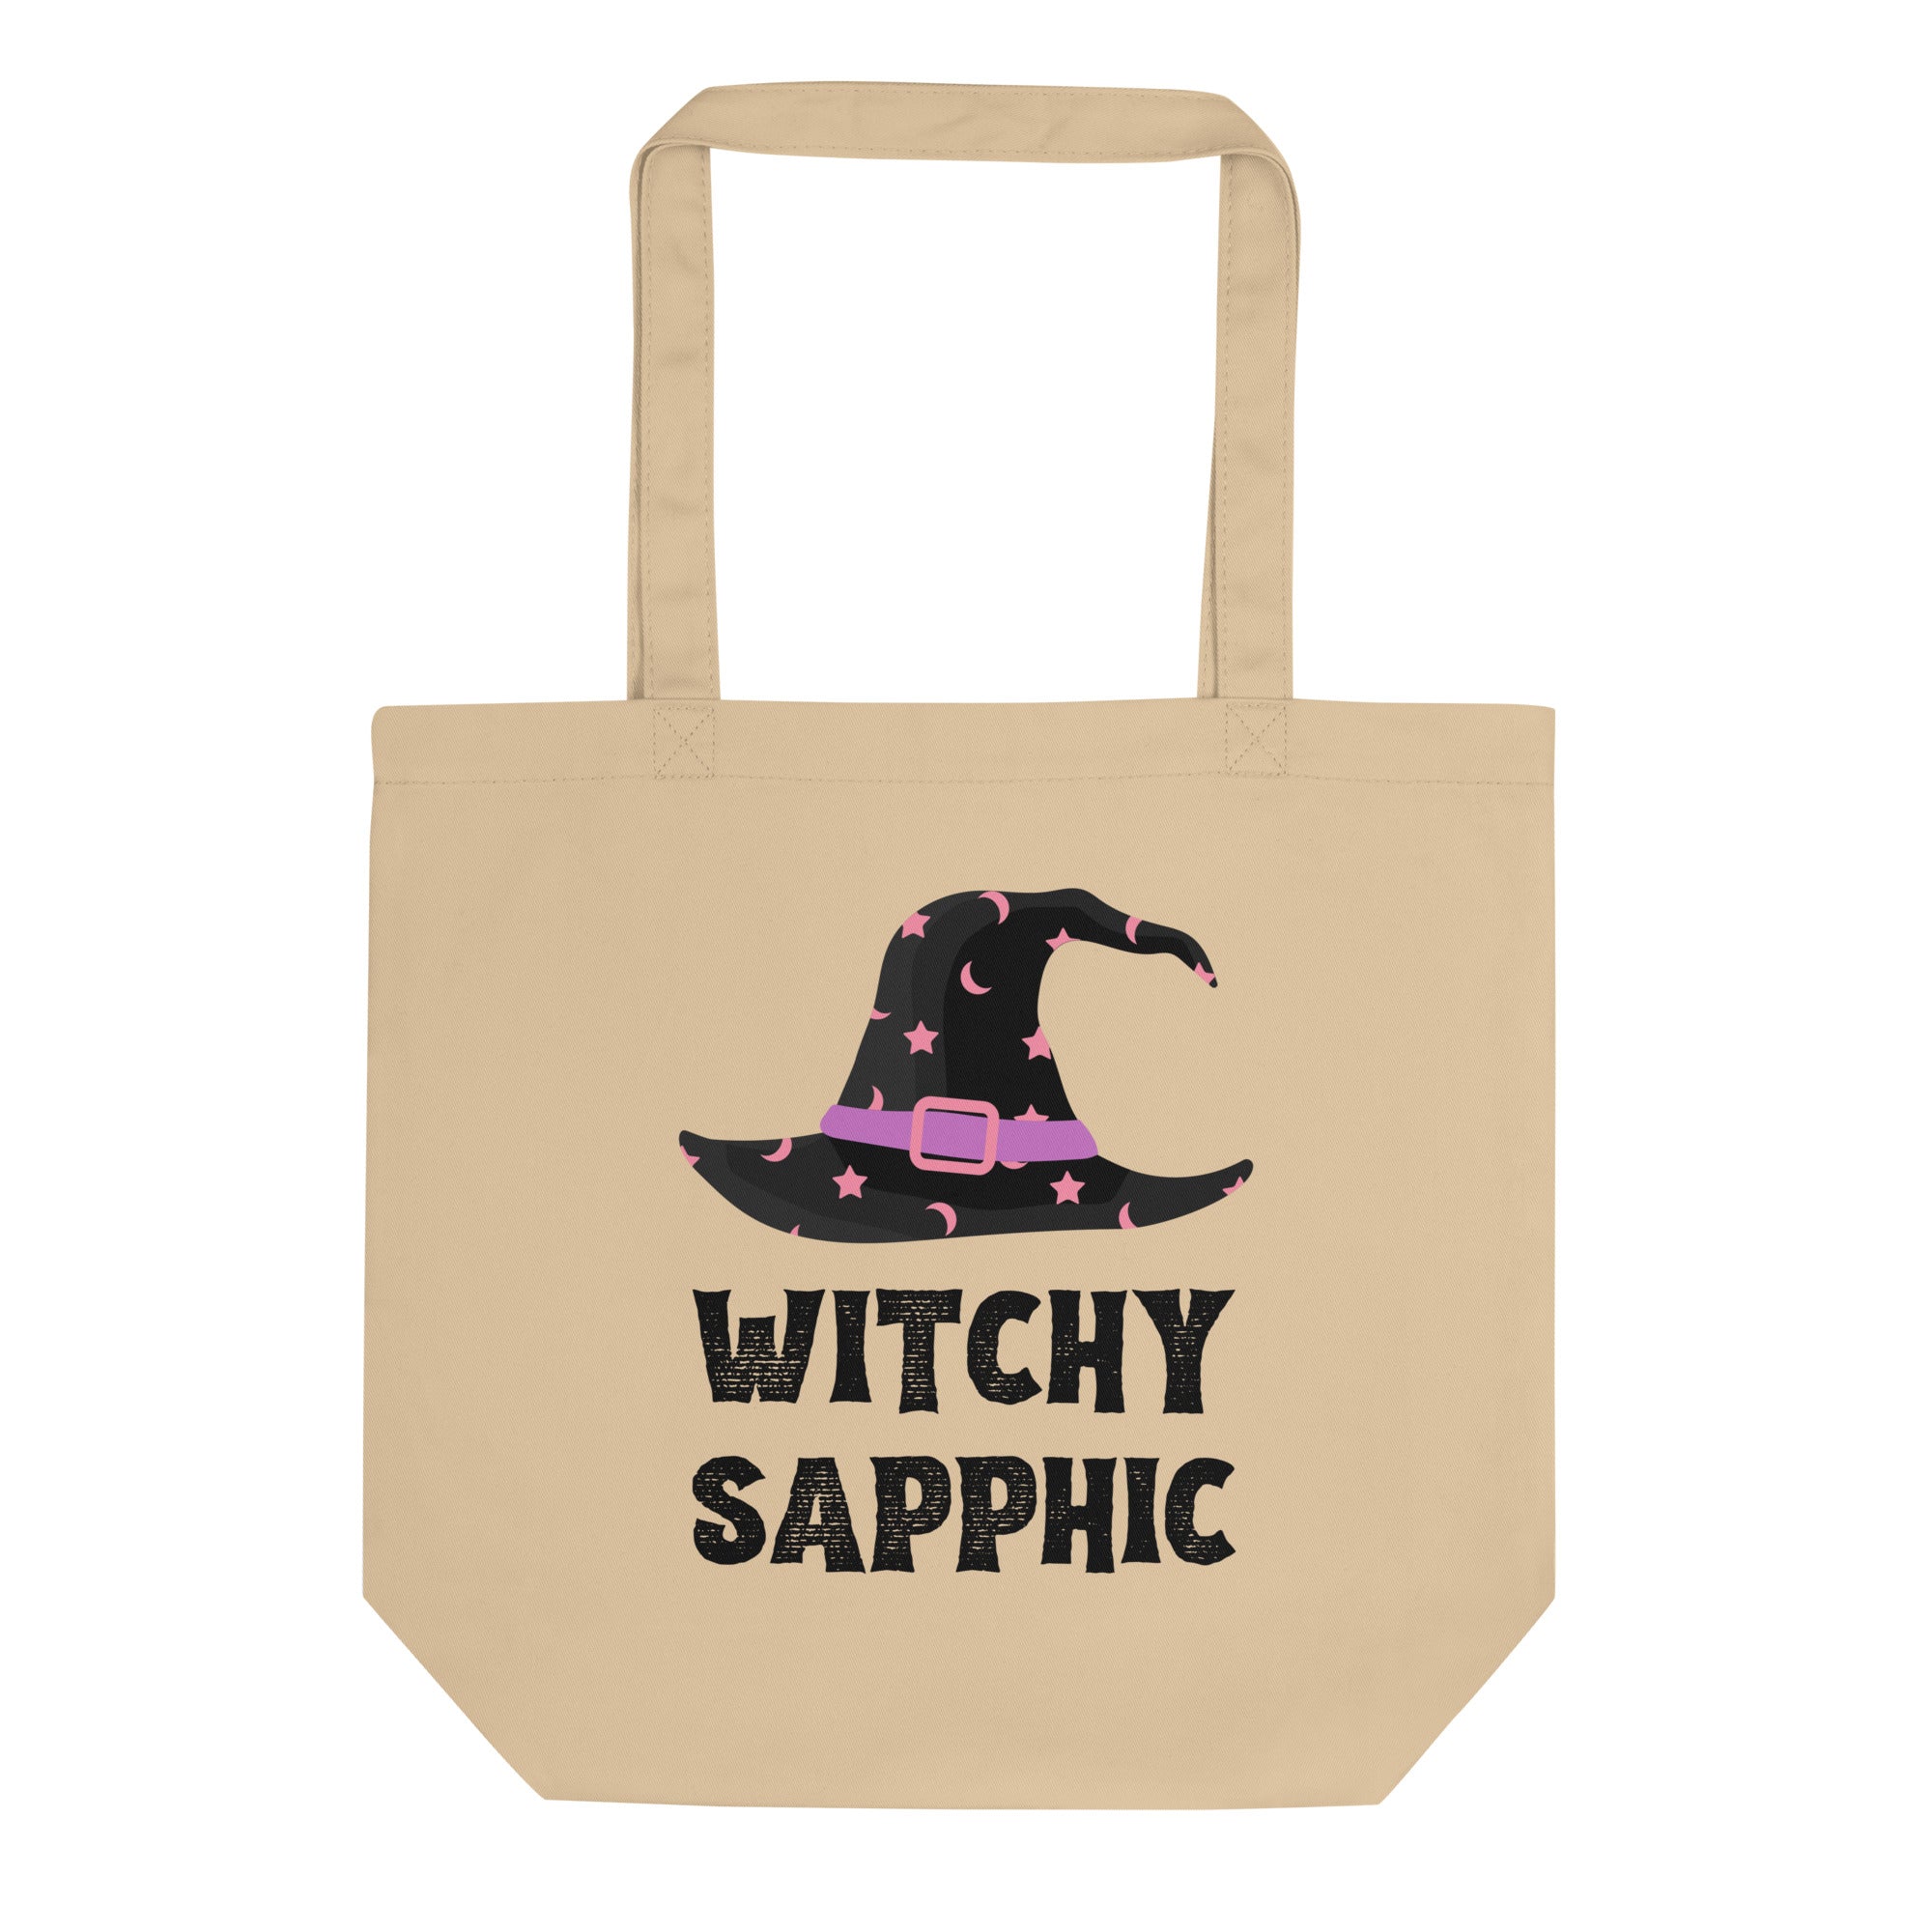 Witchy Sapphic Tote Bag